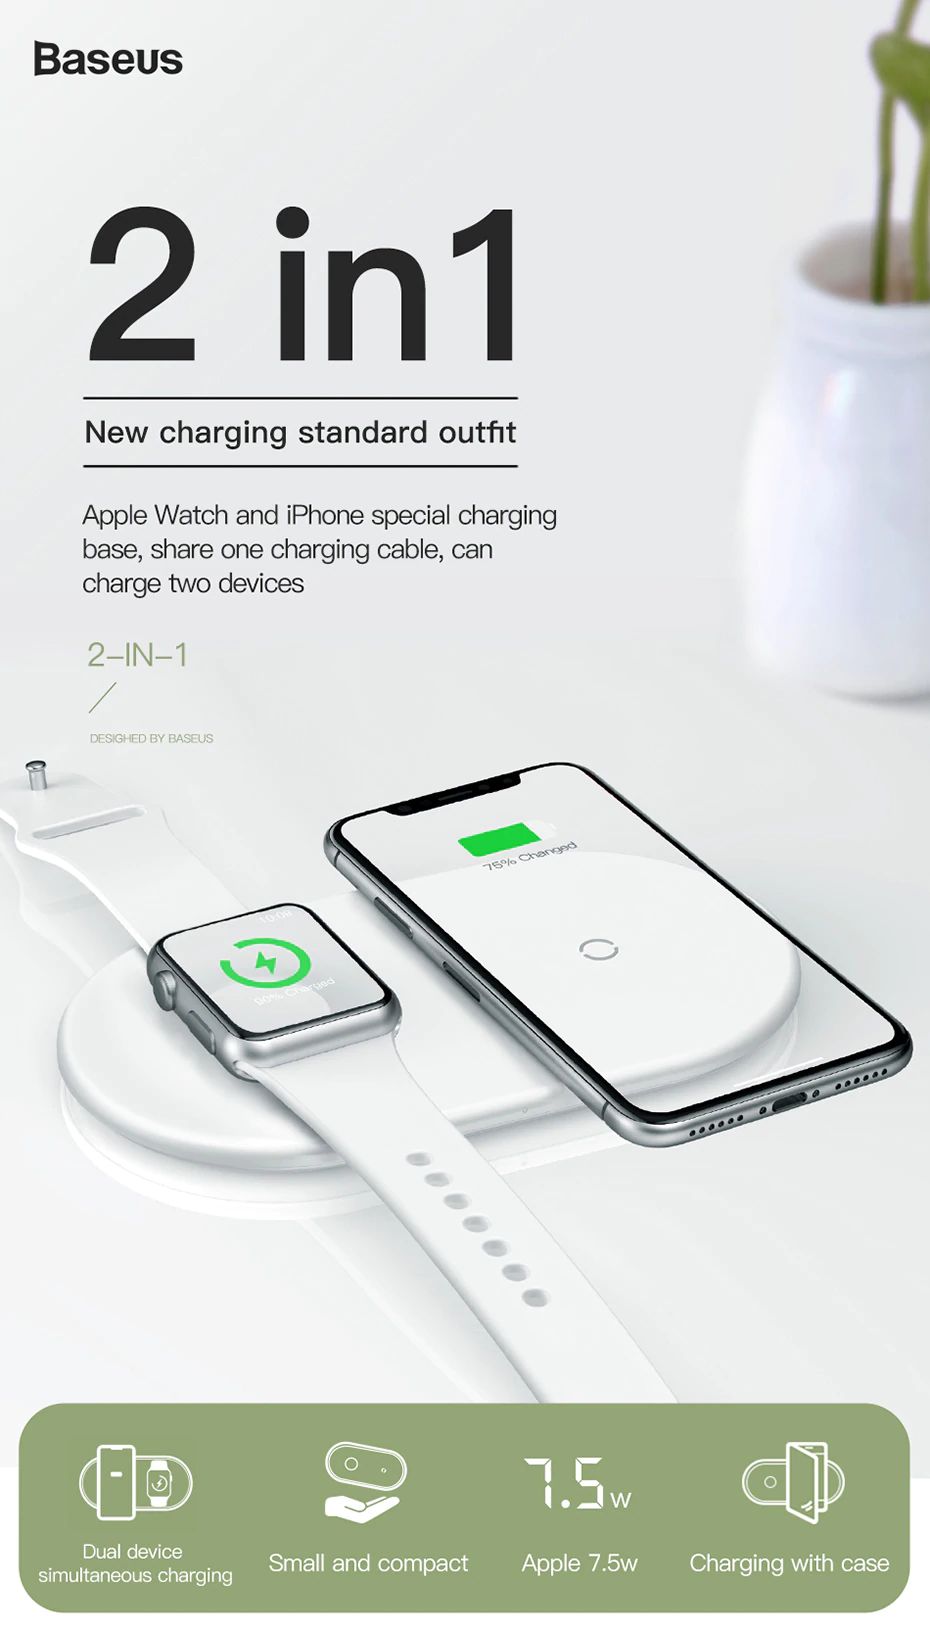 Baseus Smart 2 In 1 Wireless Qi Charger For Iphone Apple Watch (15)